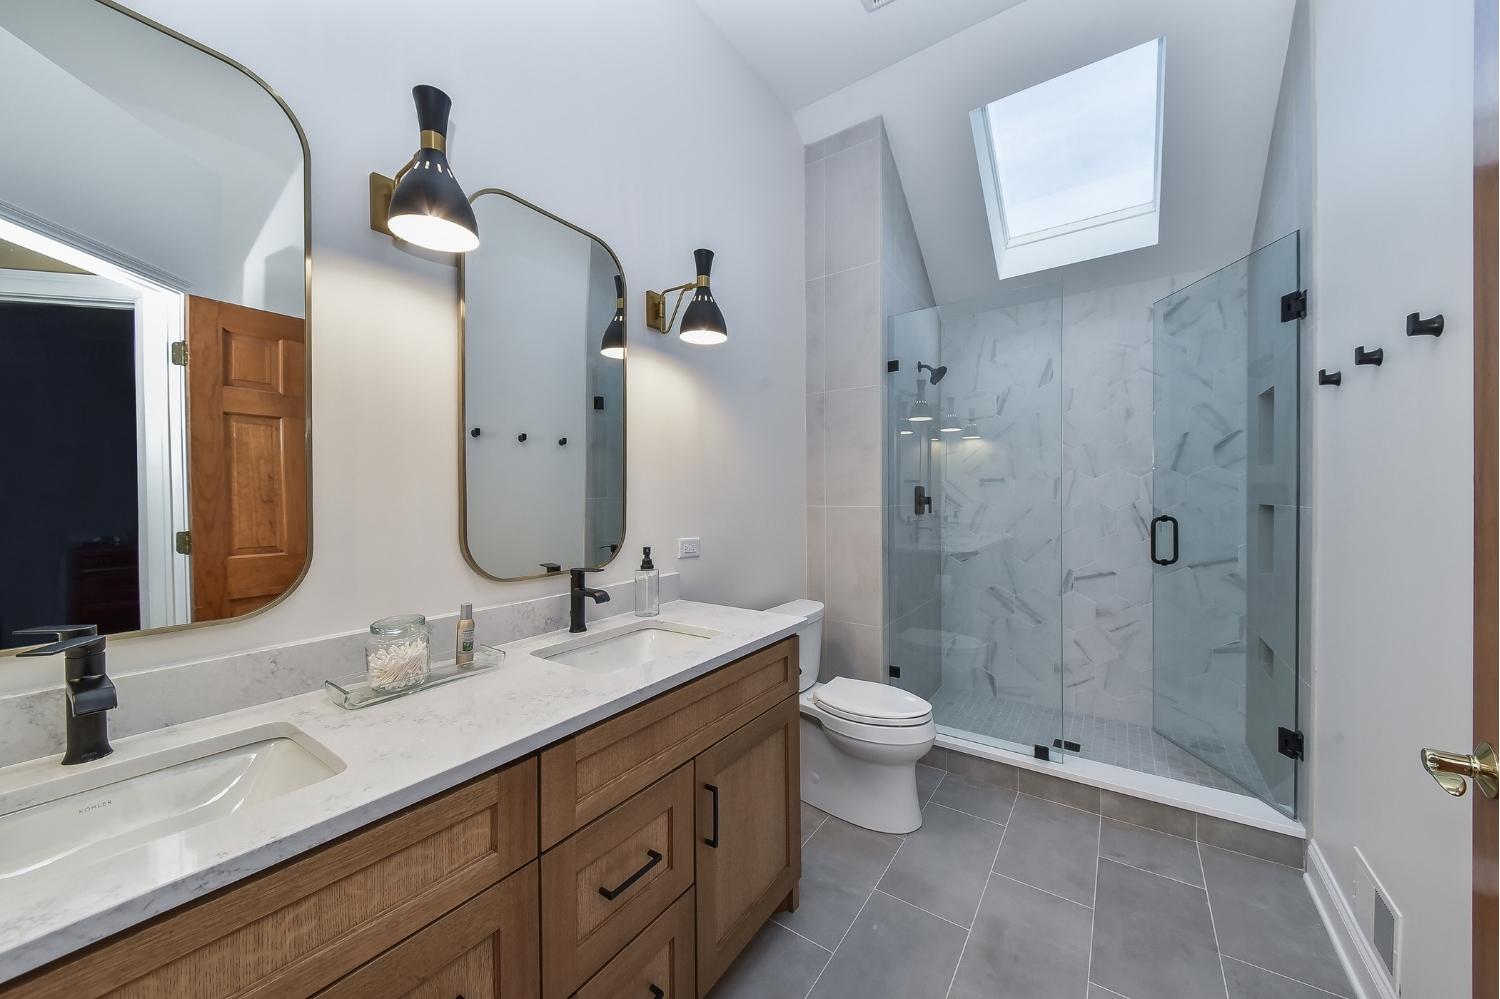 Hall Bathroom and Powder Room Pictures